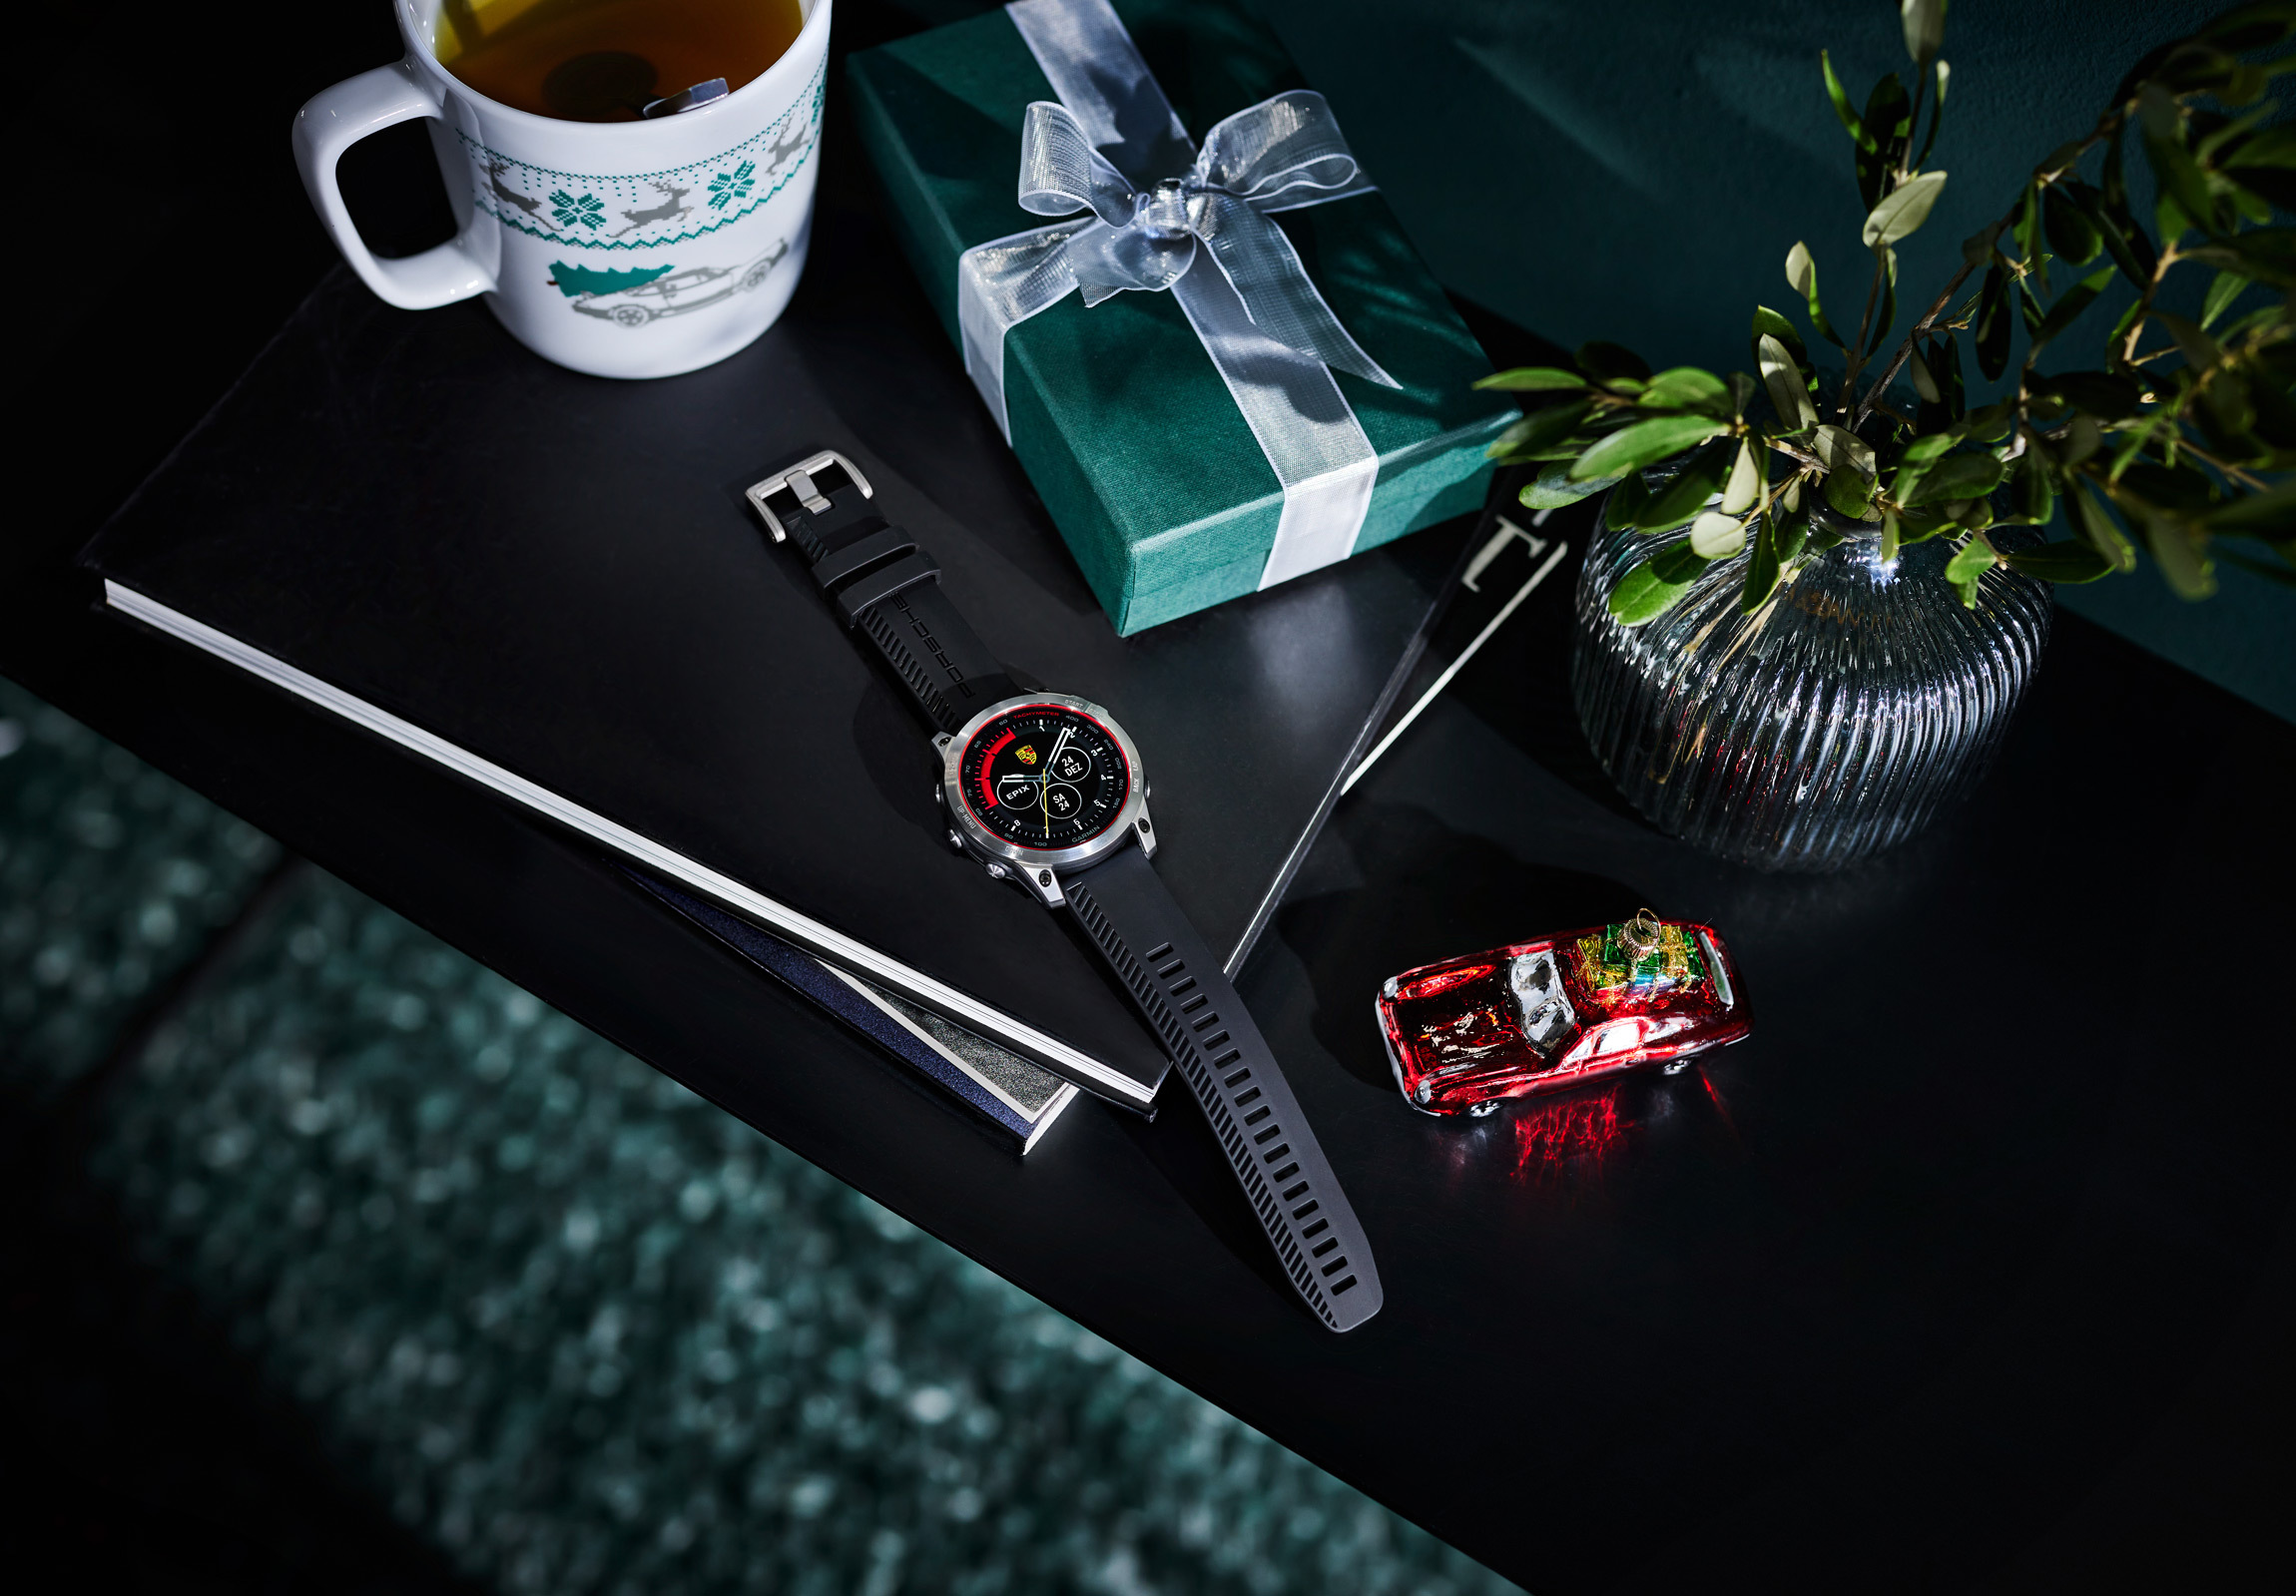 Porsche watch on table next to tea, wrapped present and model car